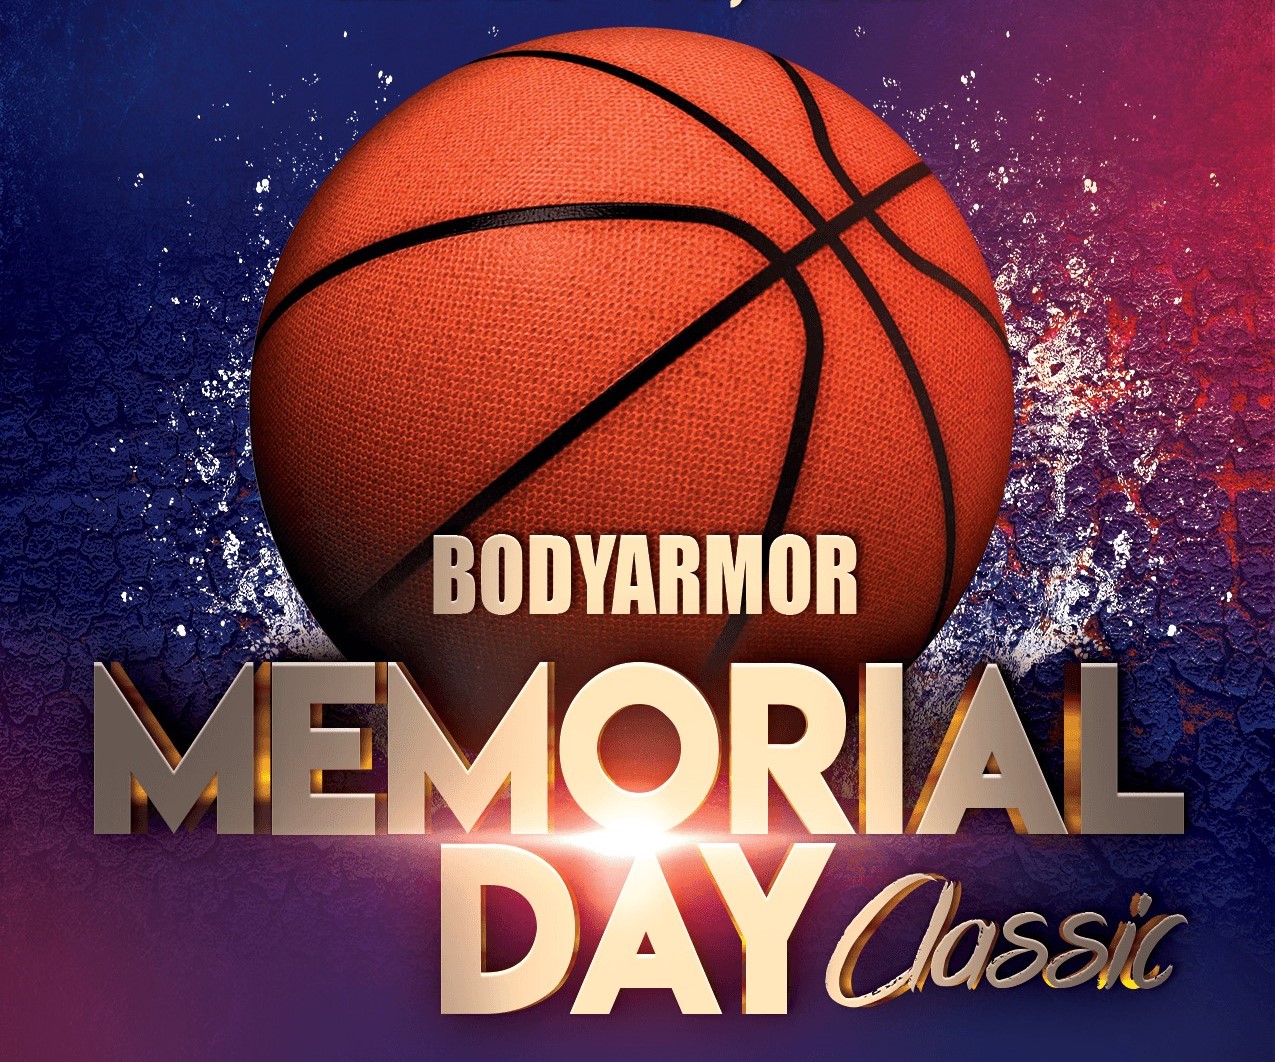 <strong><span style="font-size: 12pt;"><span style="color: #ff6600;">BODYARMOR Memorial Day Classic<br />May 28-30, 2022</span><br /><a href="http://www.midwestbballtournaments.com/ViewEvent.aspx?EID=952">Click Here for Info </a></span></strong>